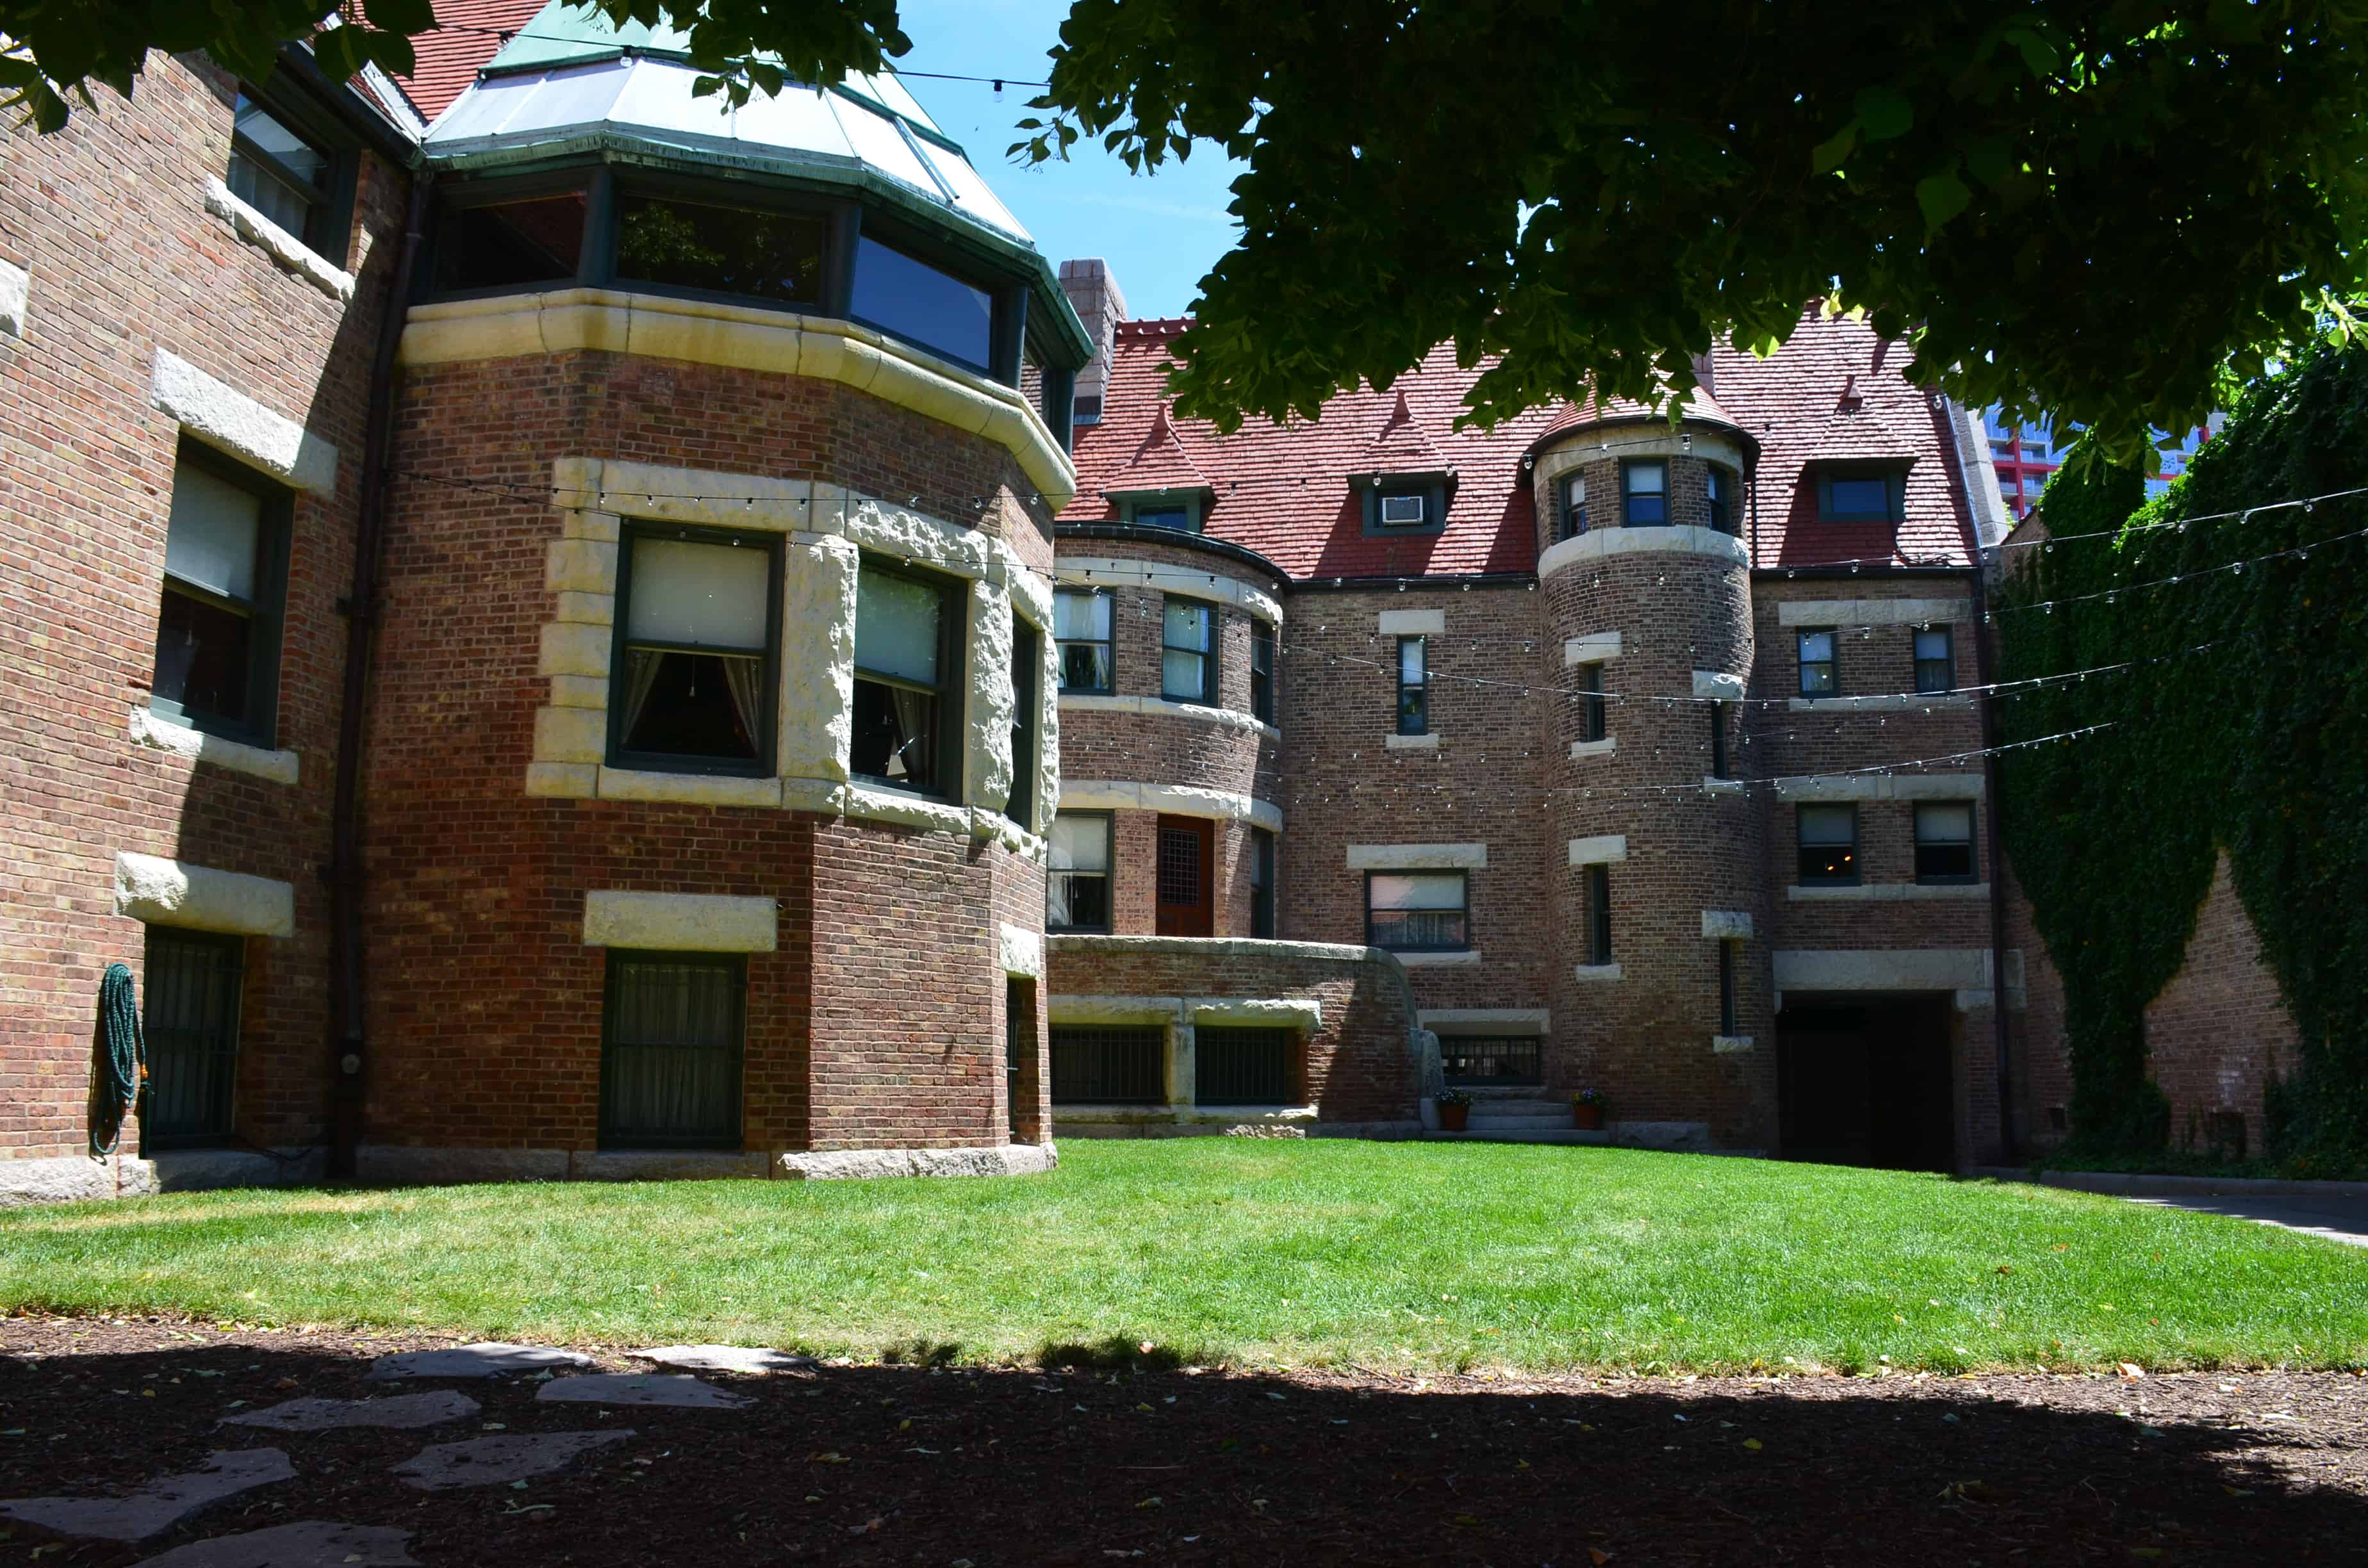 Courtyard at the John J. Glessner House in Chicago, Illinois